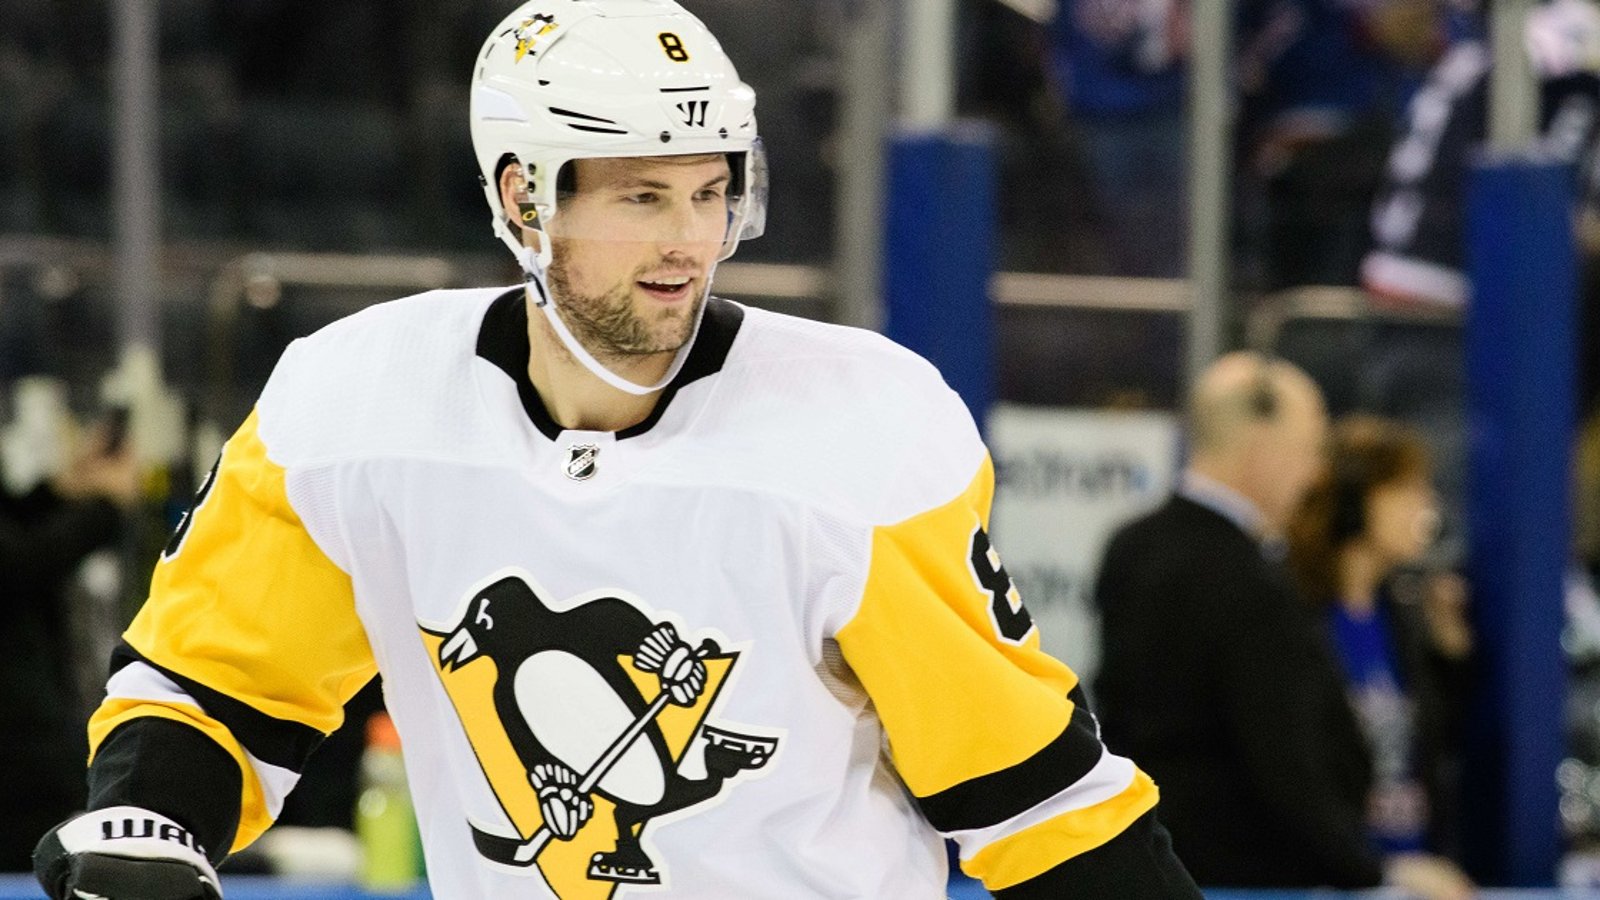 Brian Dumoulin joins the long list of injured Penguins.